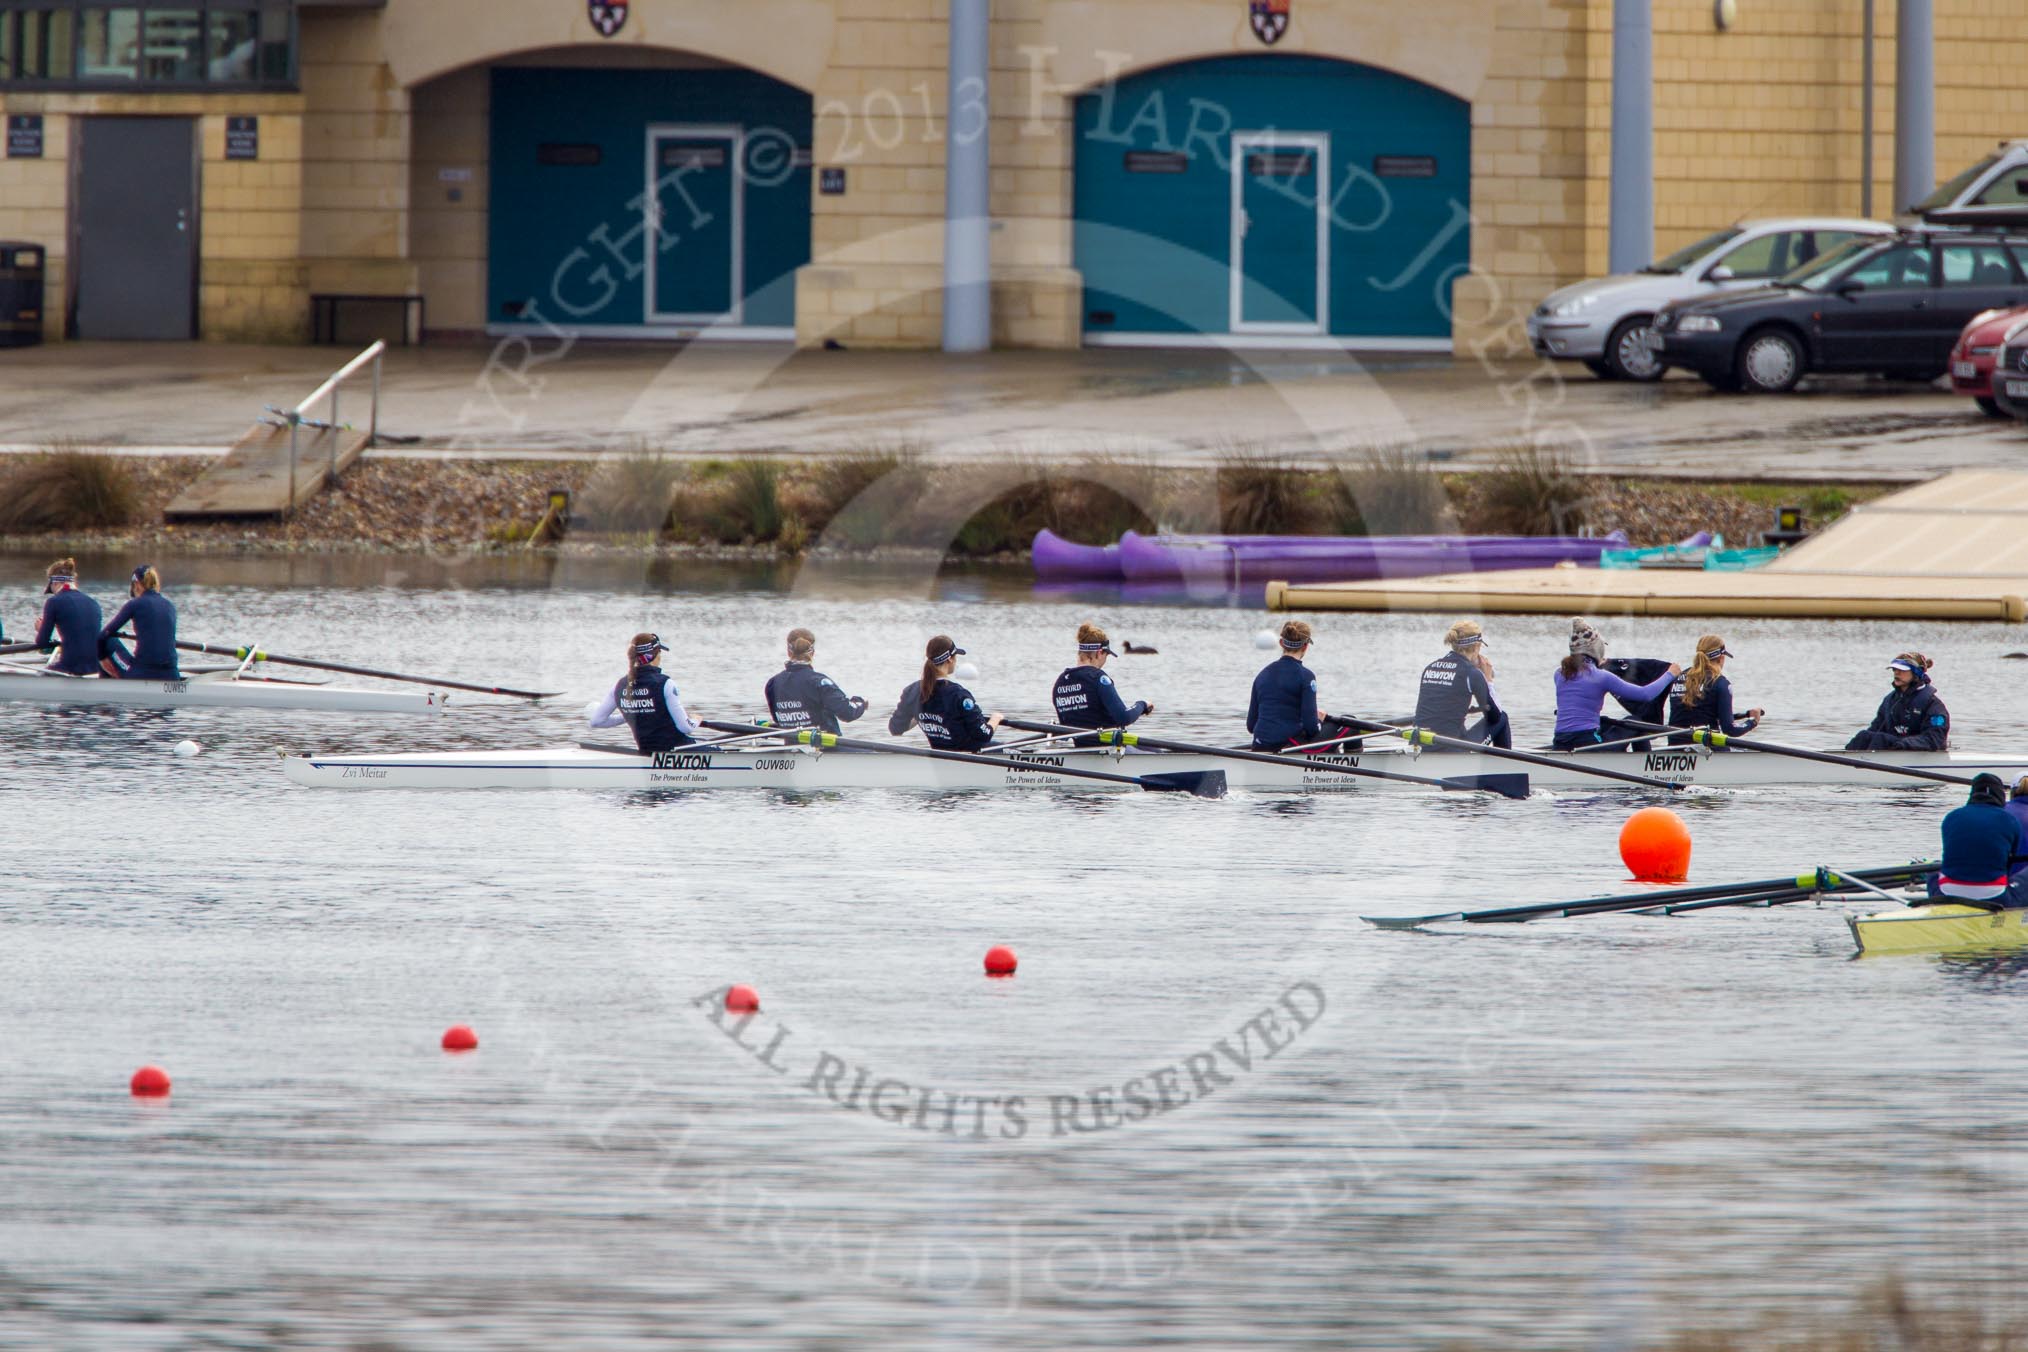 The Boat Race season 2013 - fixture OUWBC vs Olympians: Getting ready for a fixture at Dorney Lake - the OUWBC Blue Boat on the left, reserve boat Osiris in the centre, and the Olympians on the right..
Dorney Lake,
Dorney, Windsor,
Buckinghamshire,
United Kingdom,
on 16 March 2013 at 11:31, image #60